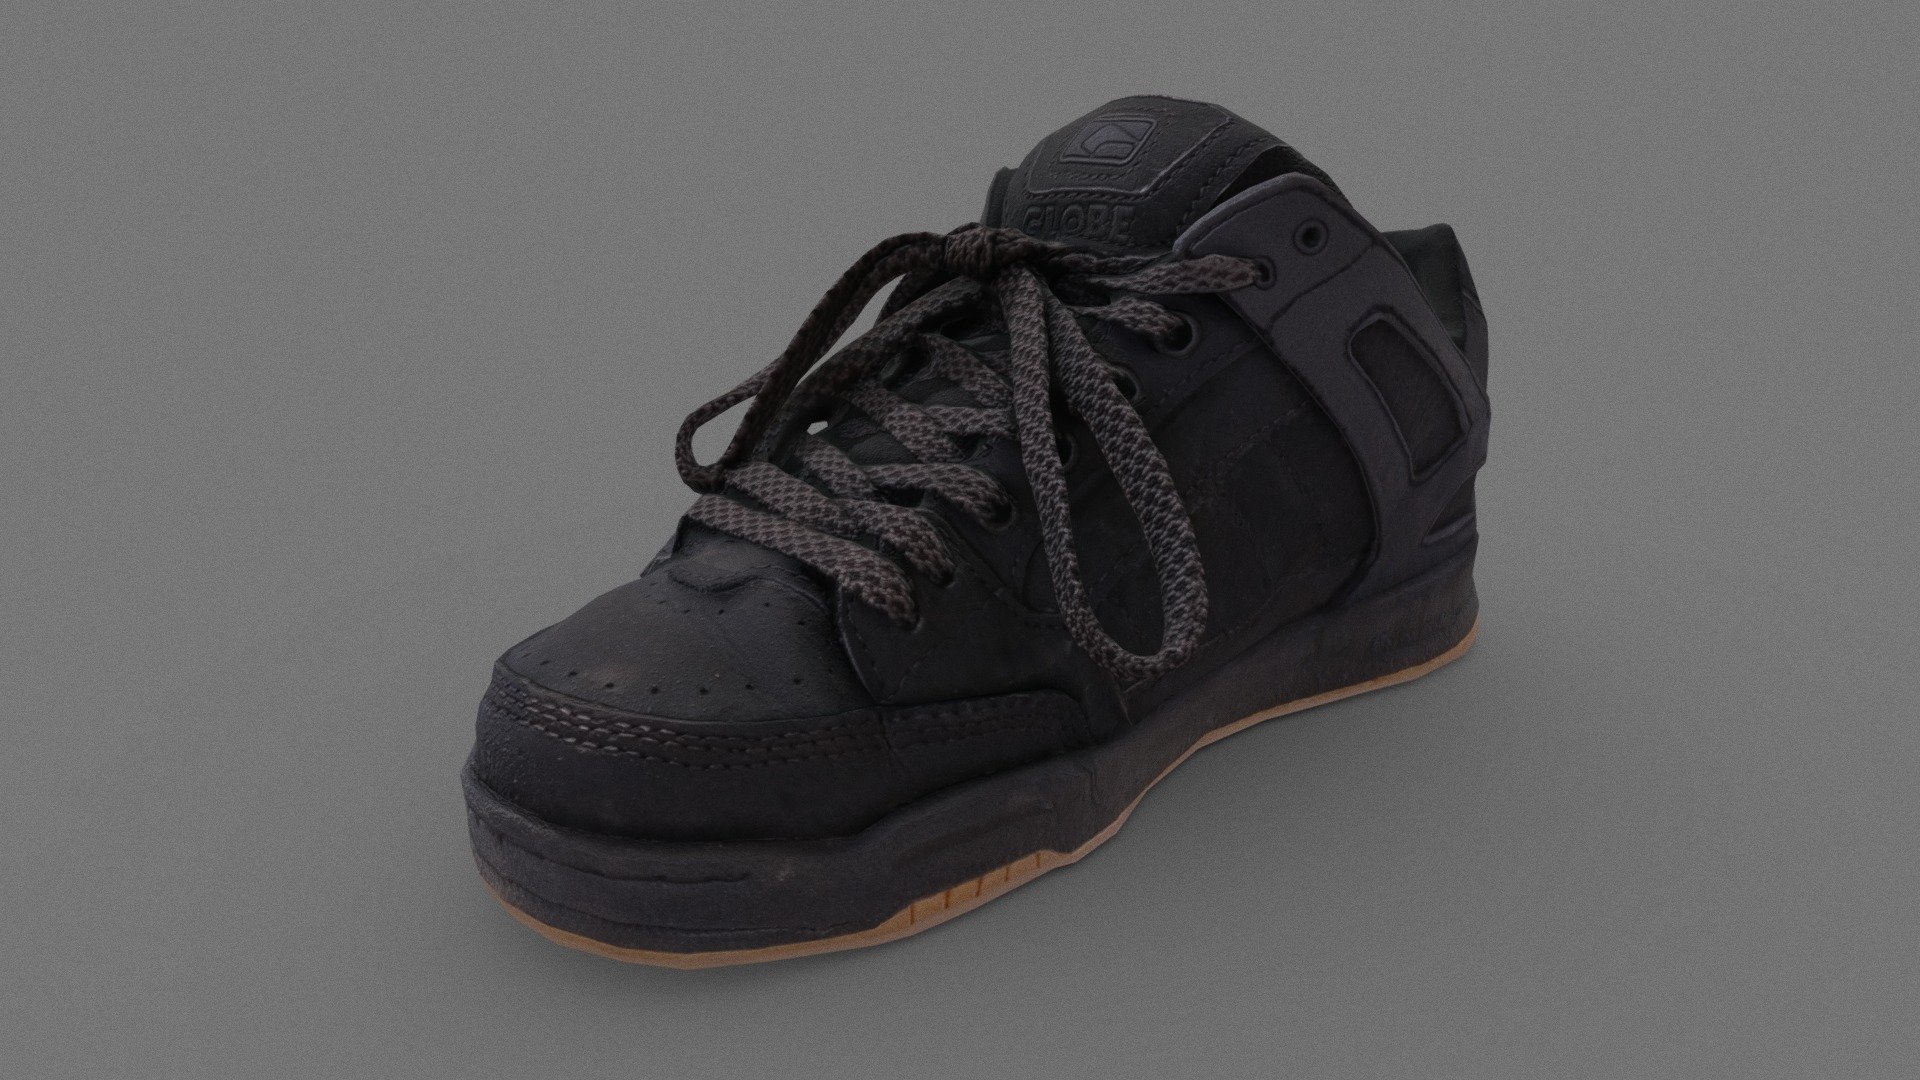 Black matte sneaker slightly worn by use. Scanned and low poly model prepared for video games 3d model